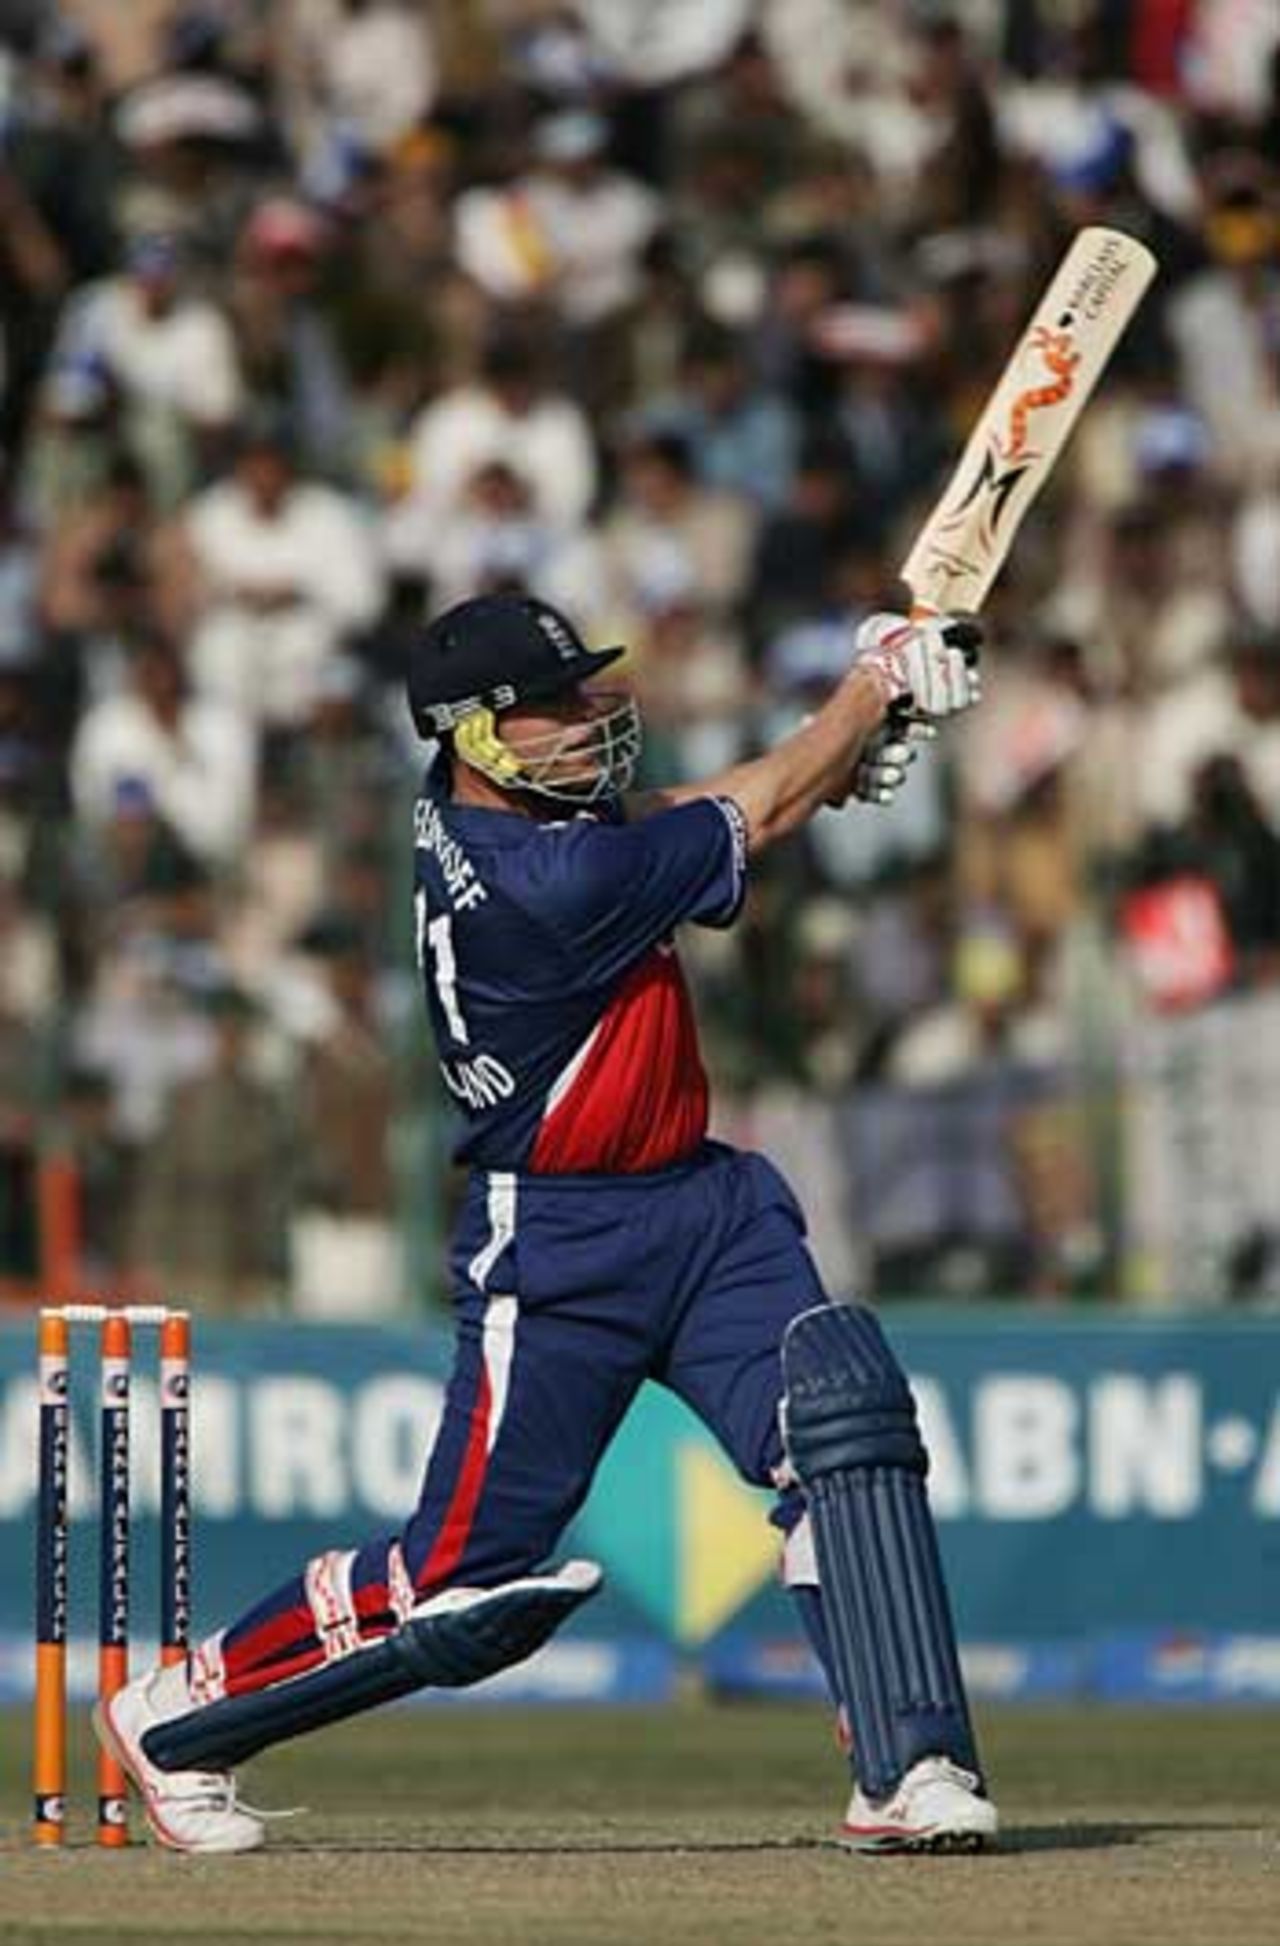 Andrew Flintoff launches another ball to boundary during is late assault on the Pakistan attack, Pakistan v England, 1st ODI, Lahore, December 10, 2005